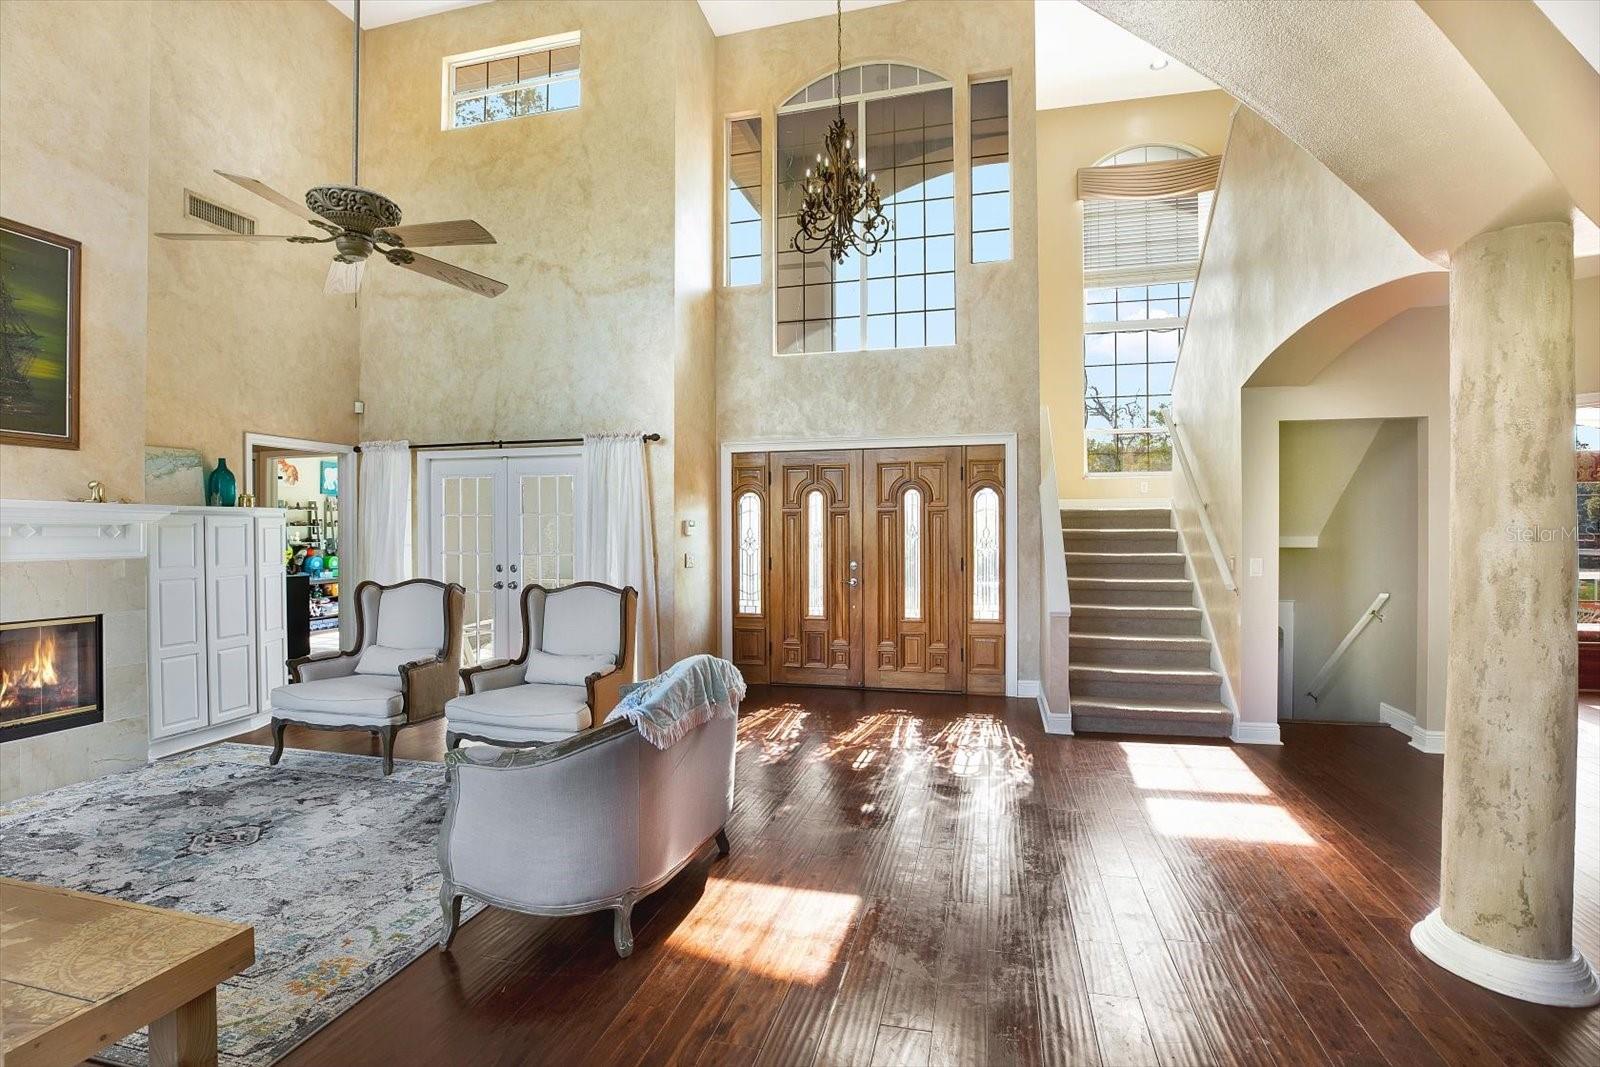 An open floor plan greets you at the door with windows and ceiling height galore